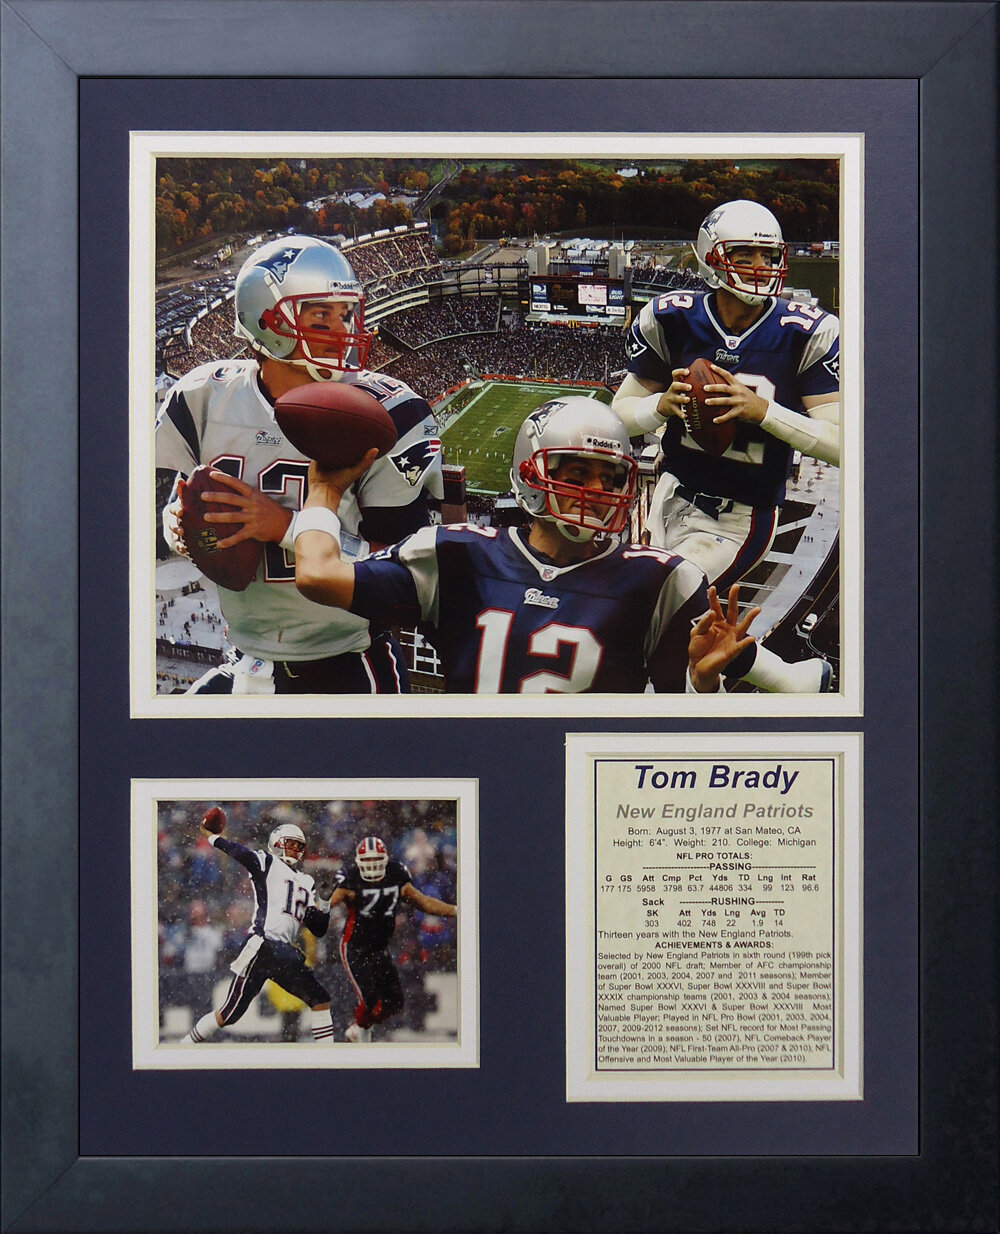 Tom Brady New England Patriots Framed Canvas Portrait Signed "Great Gift" 